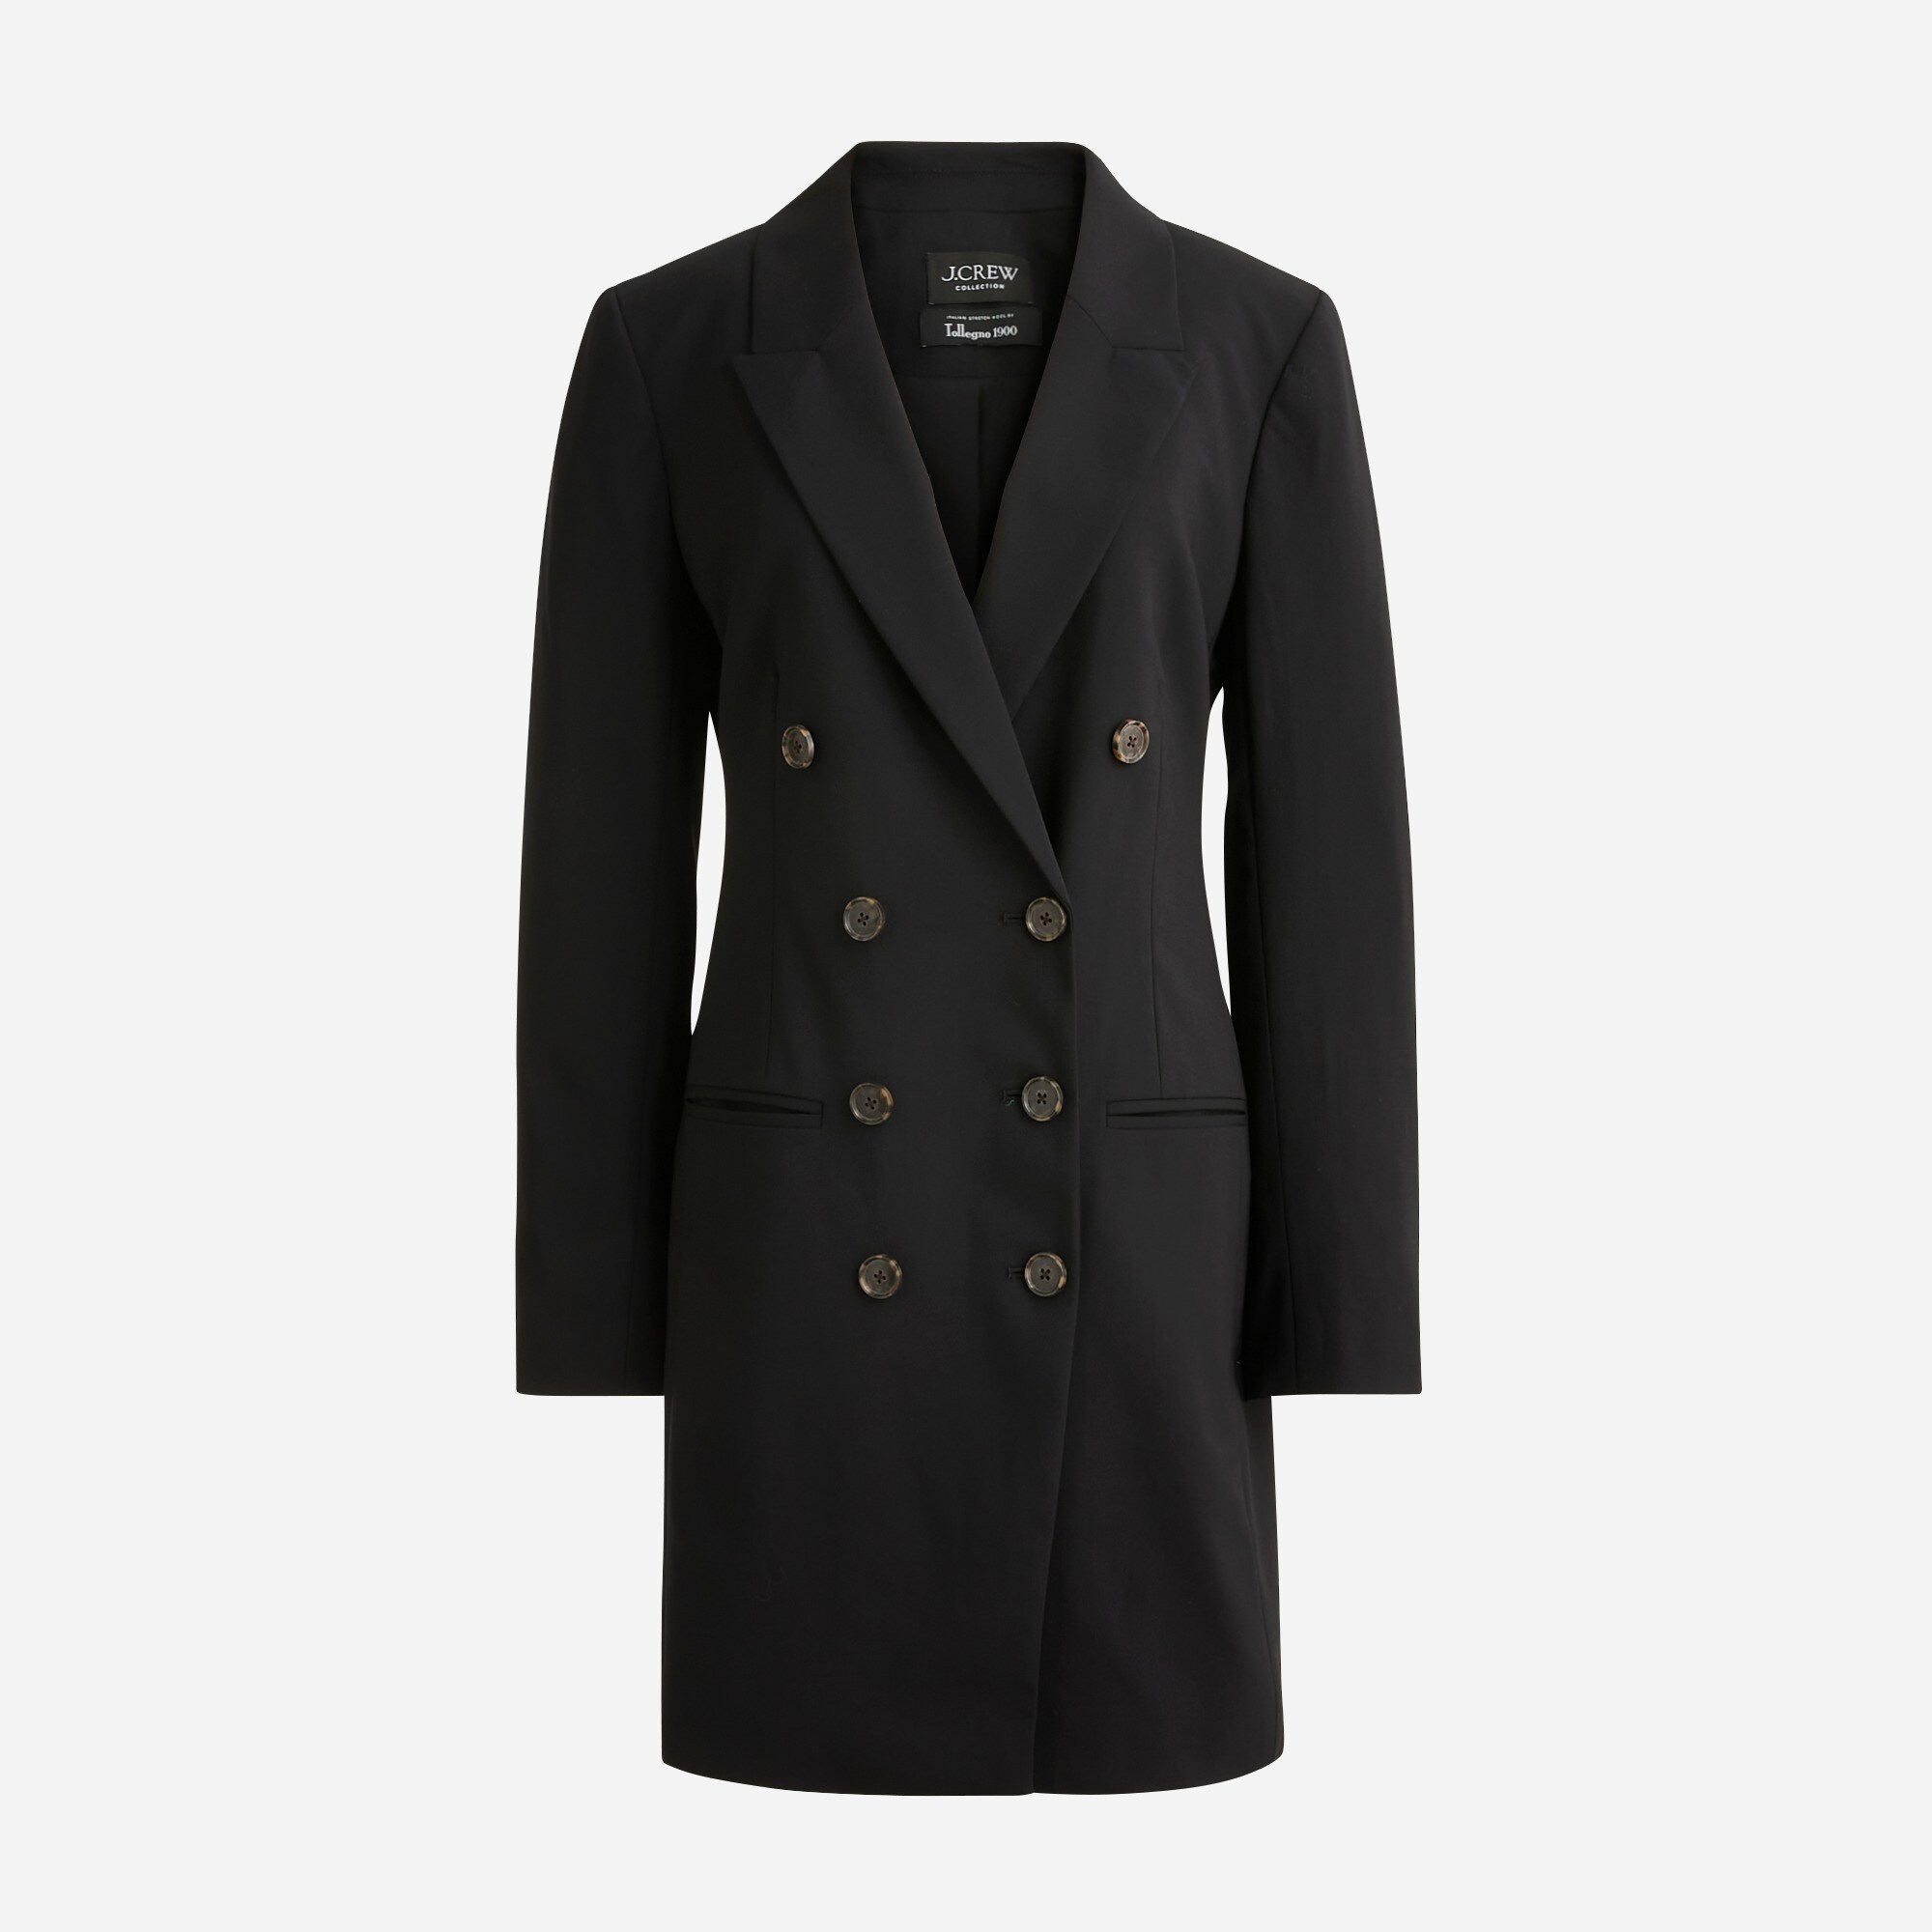  Collection double-breasted blazer-dress in Italian stretch wool blend